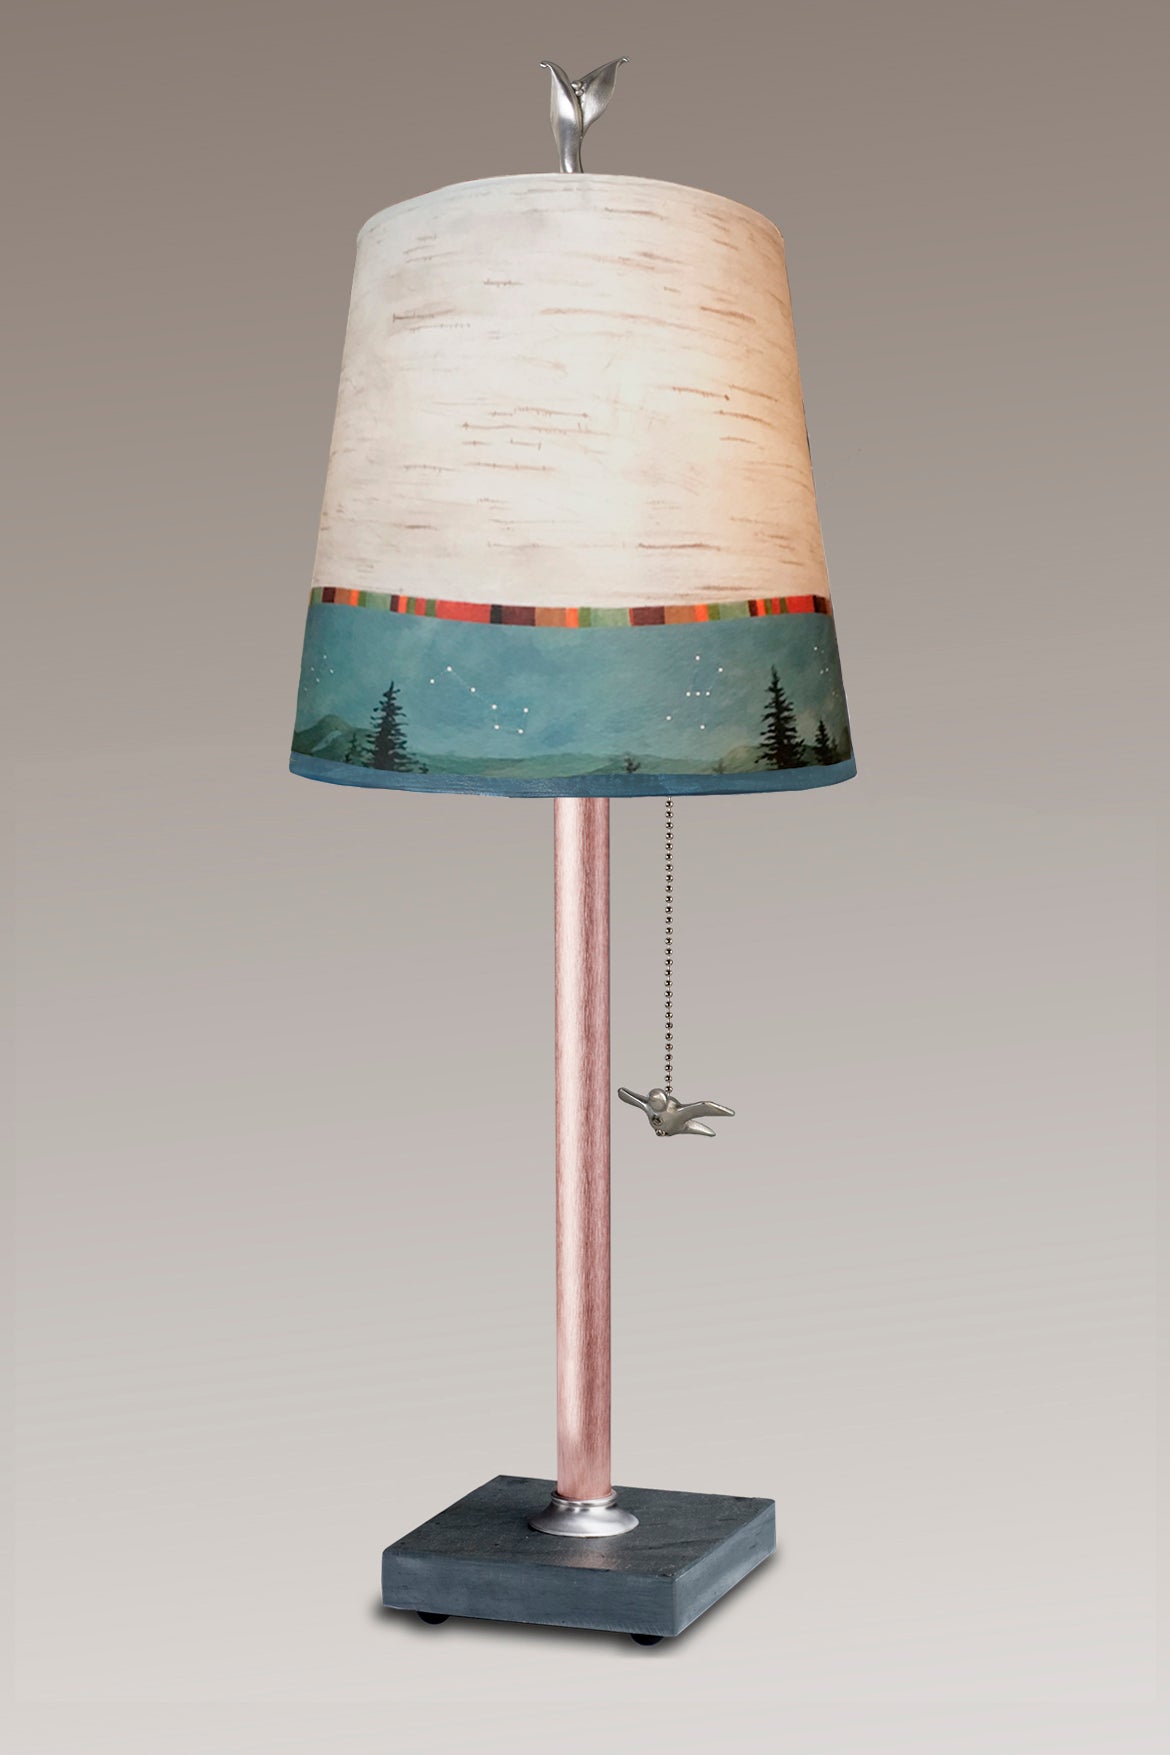 Janna Ugone & Co Table Lamps Copper Table Lamp with Small Drum Shade in Birch Midnight